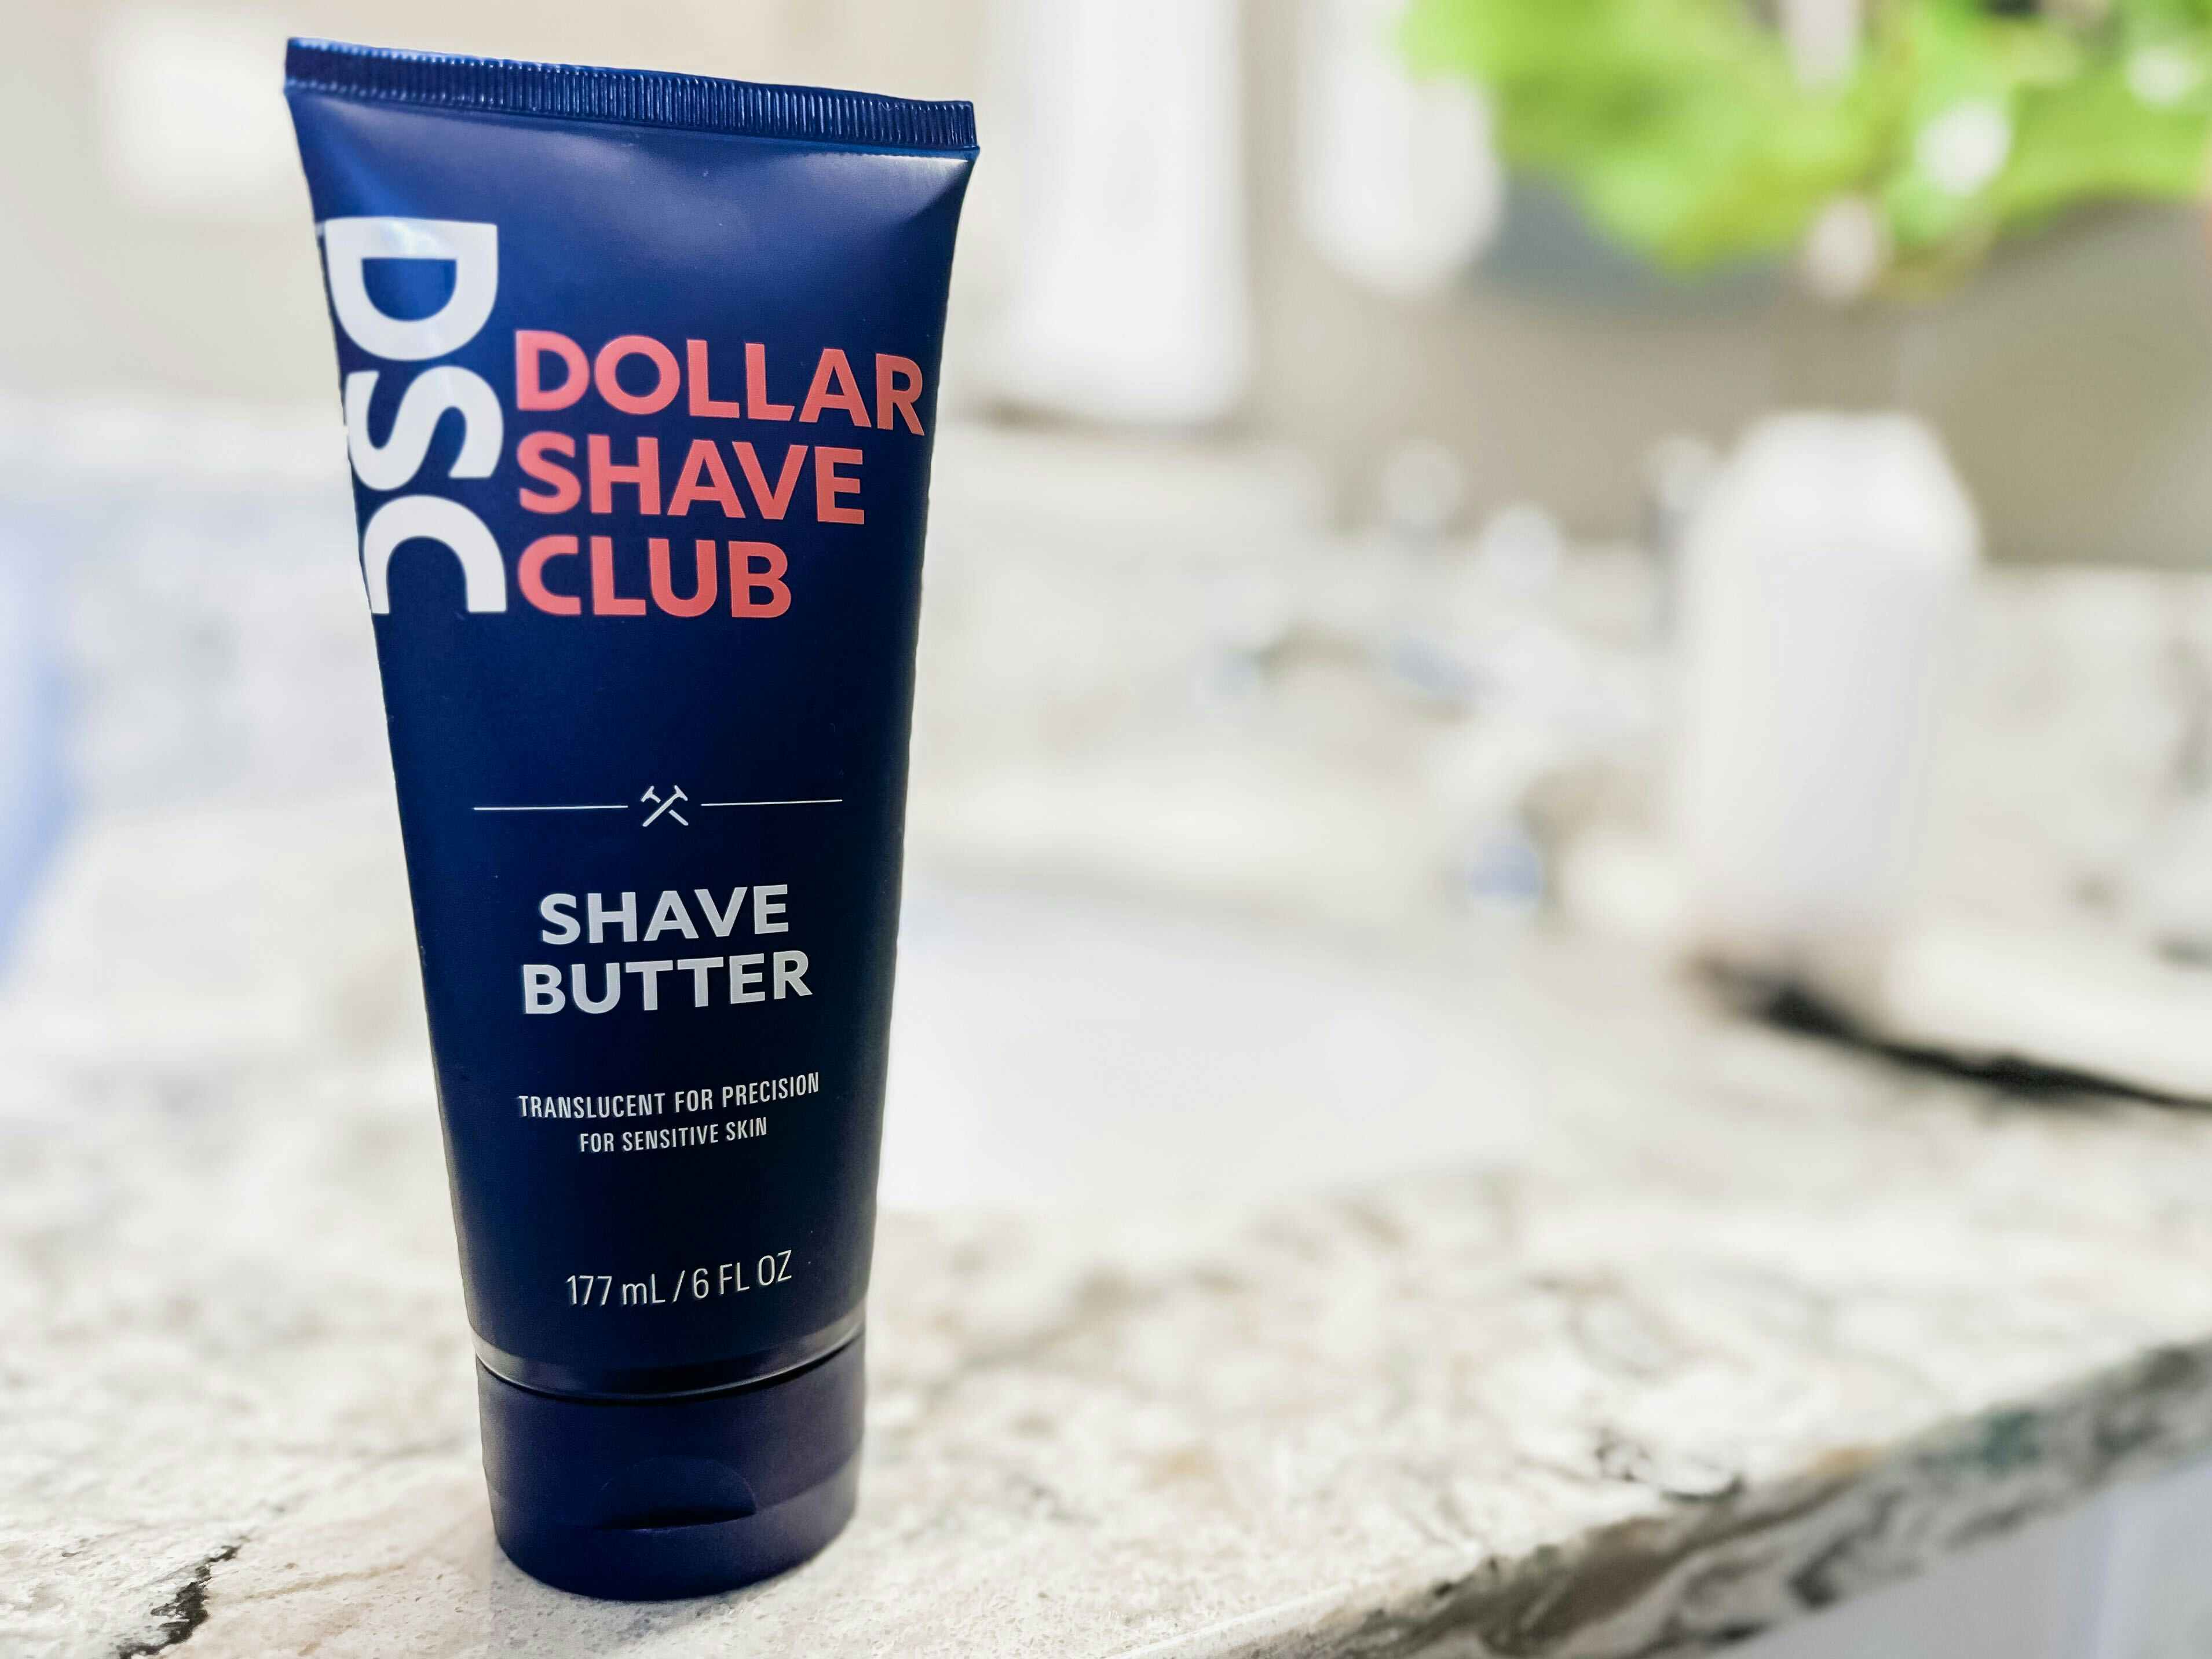 A bottle of the Dollar Shave Club Shave Butter on a bathroom countertop